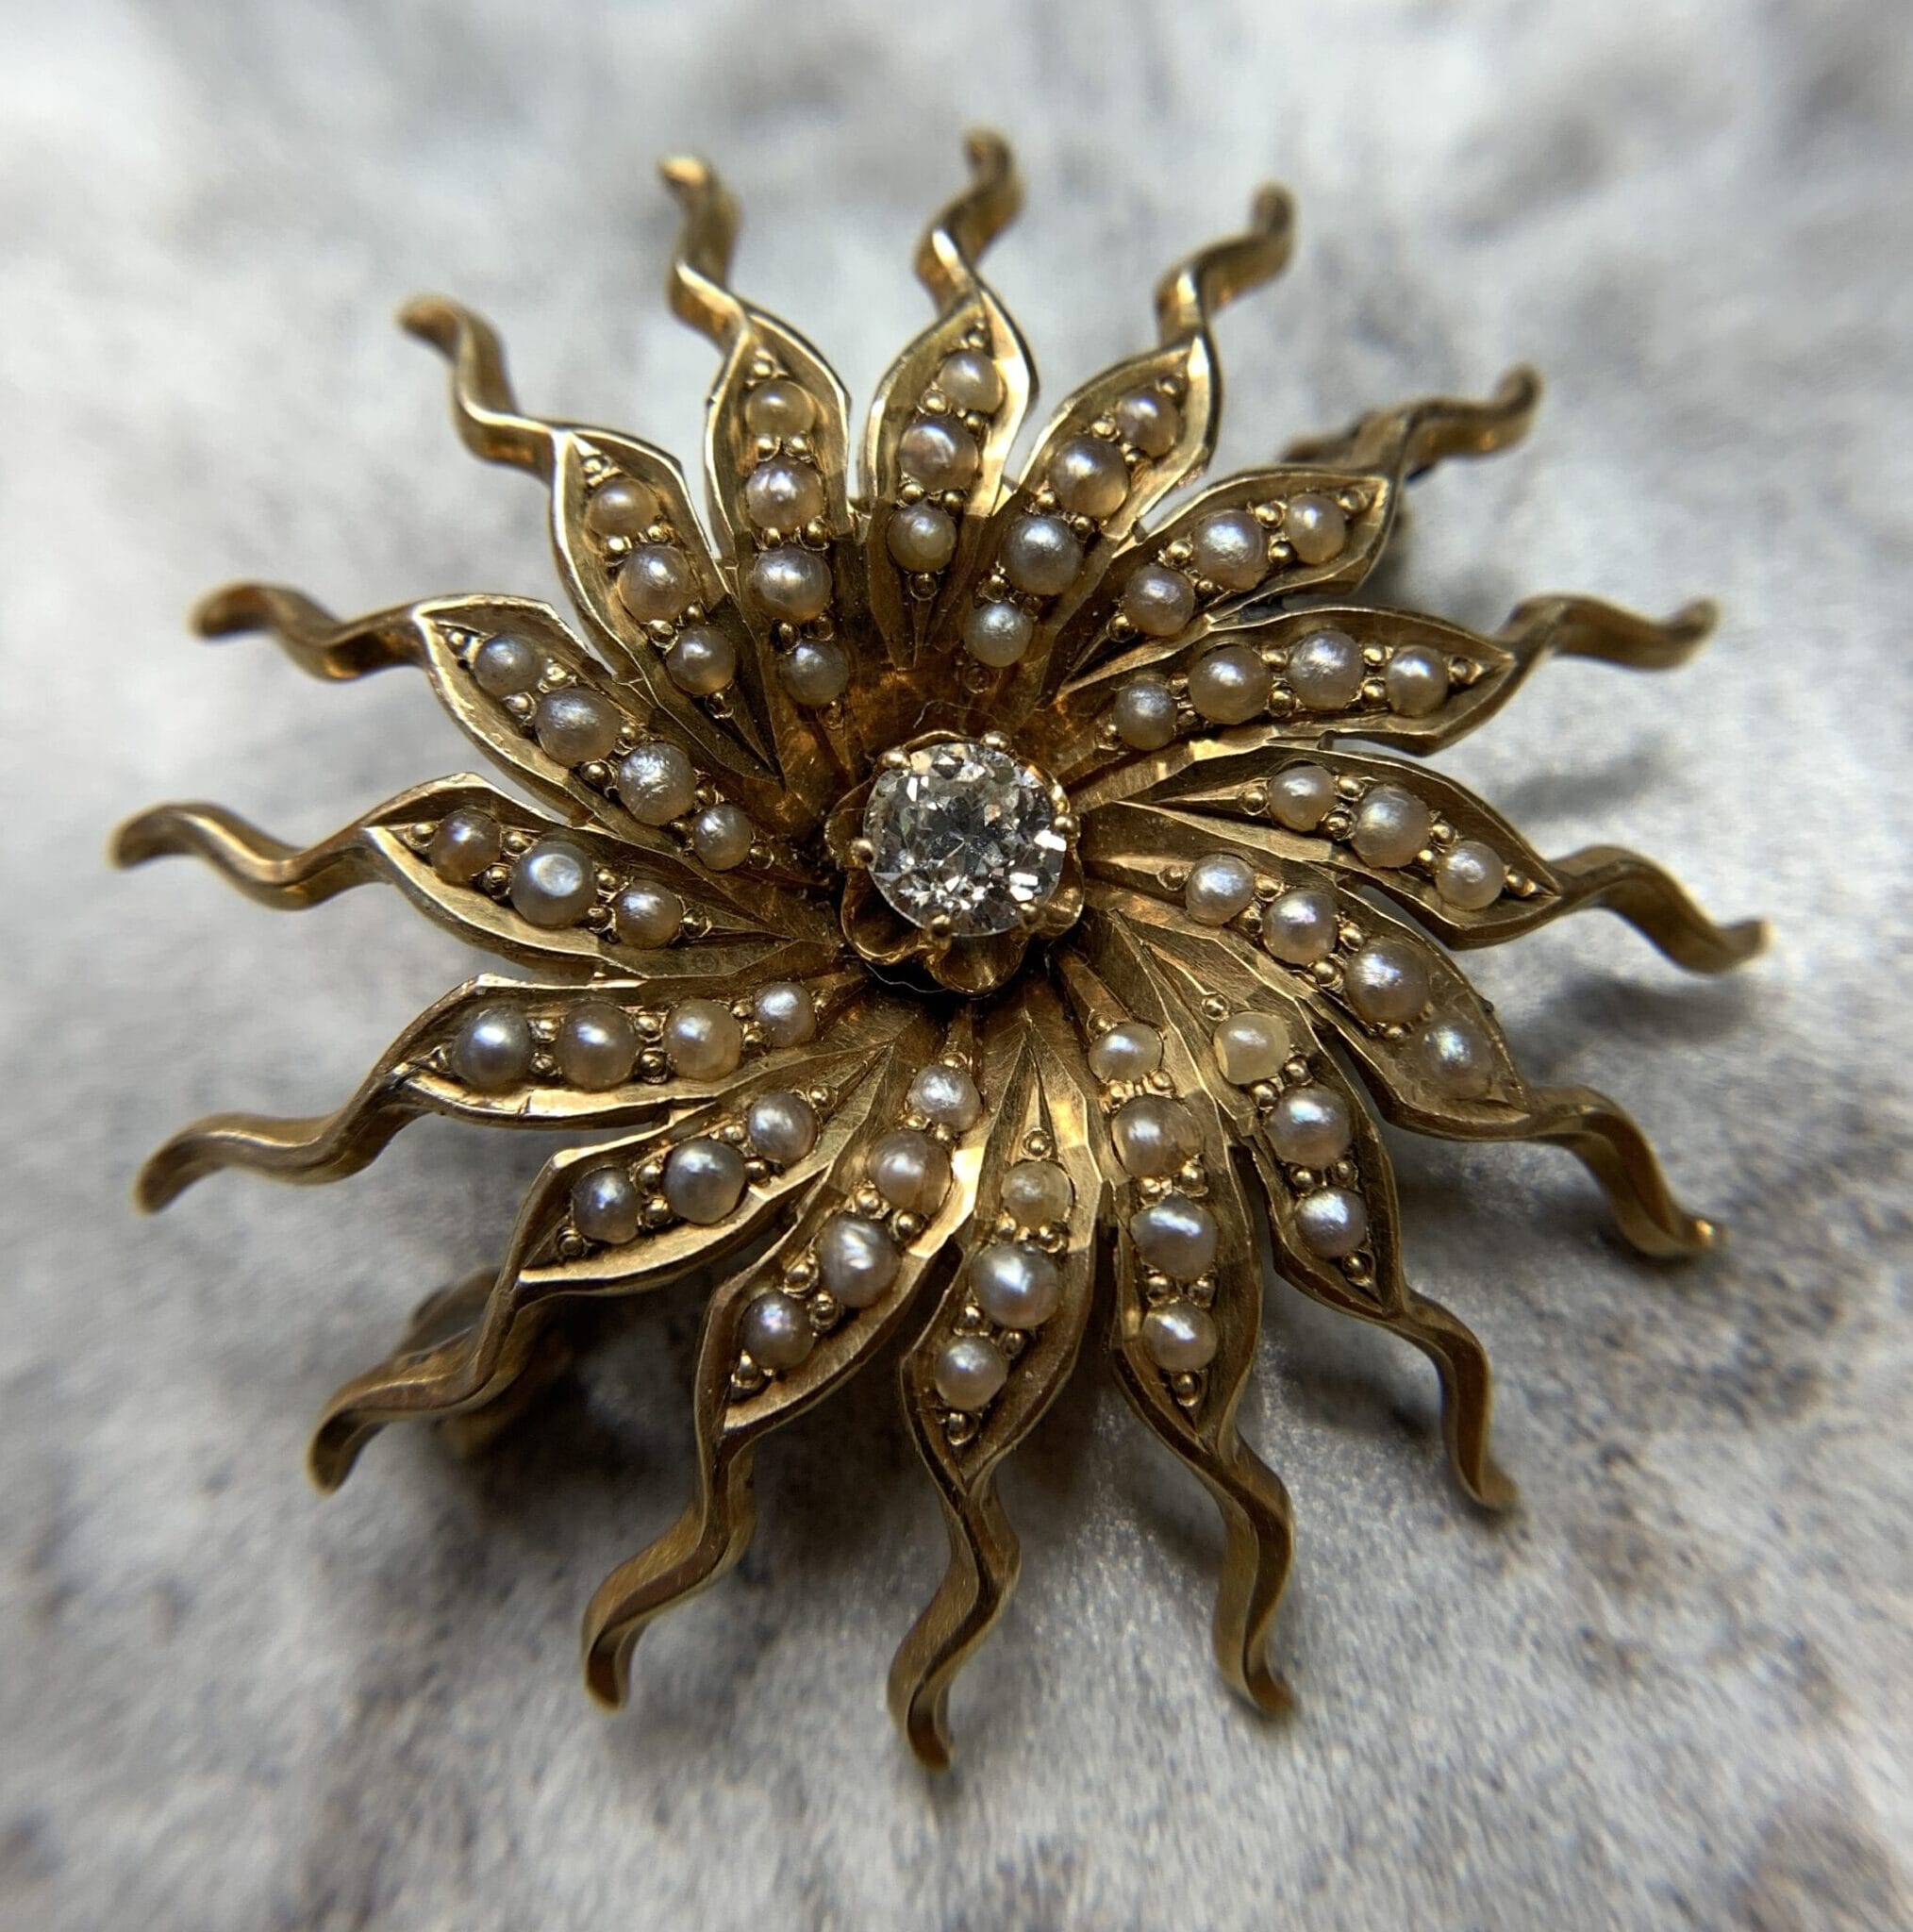 Antique 14k Diamond and Pearl Sunburst Brooch Pin (A2569) - Summit Jewelers, 7821 Big Bend Blvd., Webster Groves, MO, 63119